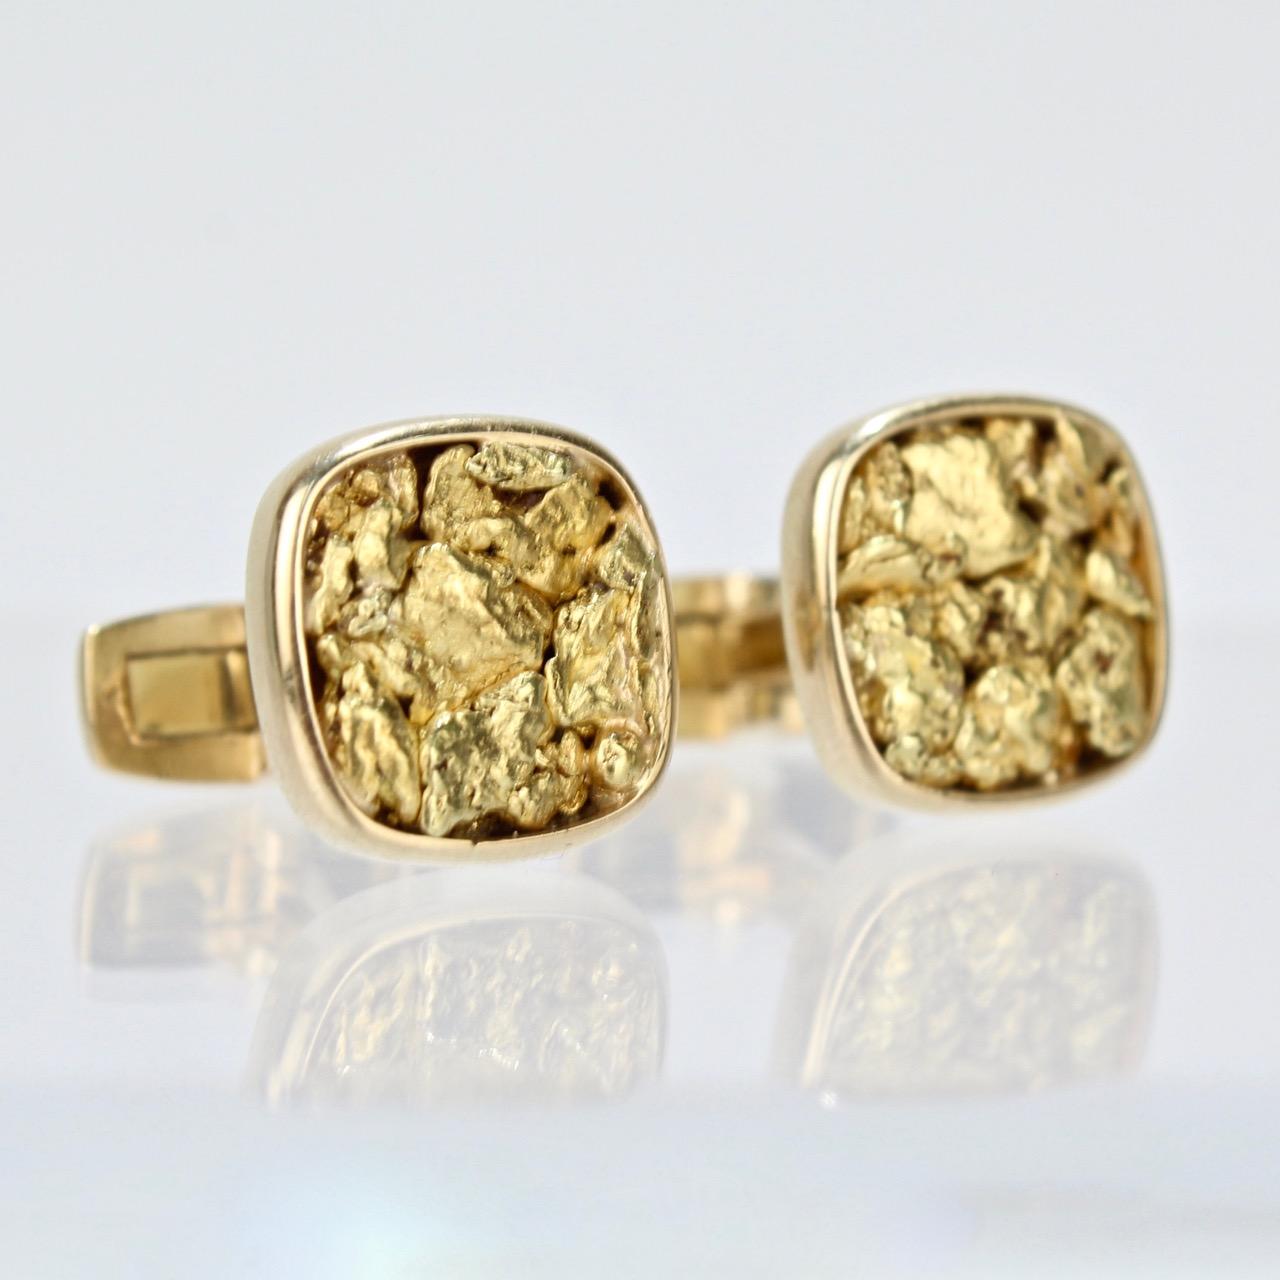 A fine pair of masculine gold nugget cufflinks.

Wonderfully worked with diminutive gold nuggets set in rounded square bezel settings. 

The reverse marked with a leaf maker's mark, a gold miner's tools mark, and 14K.

Width: just over 1/2